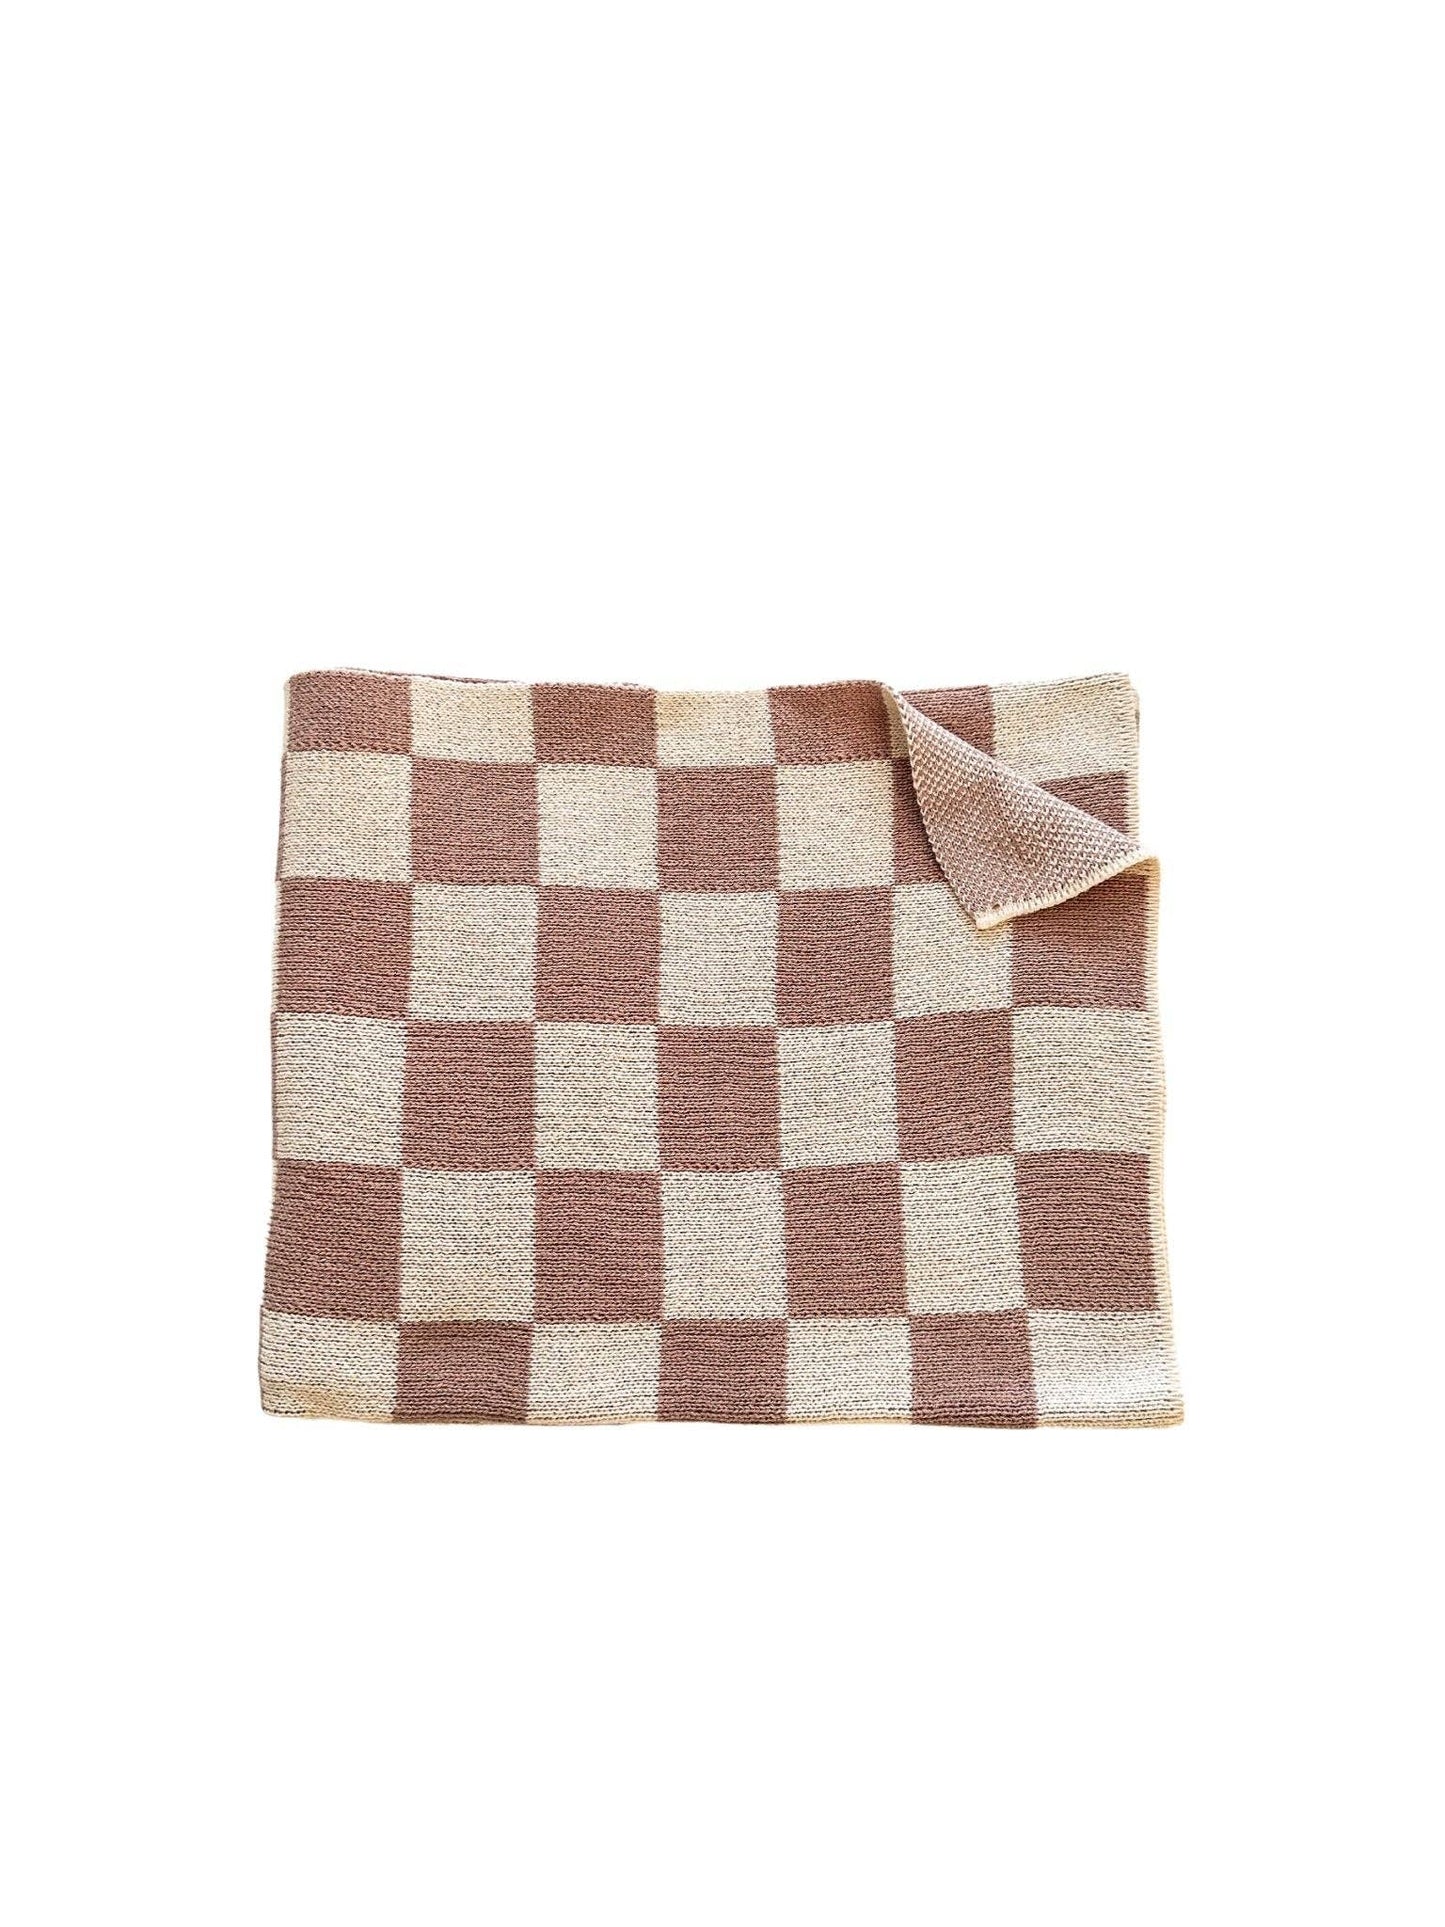 Knitted Baby Blanket - Neutral Checkered